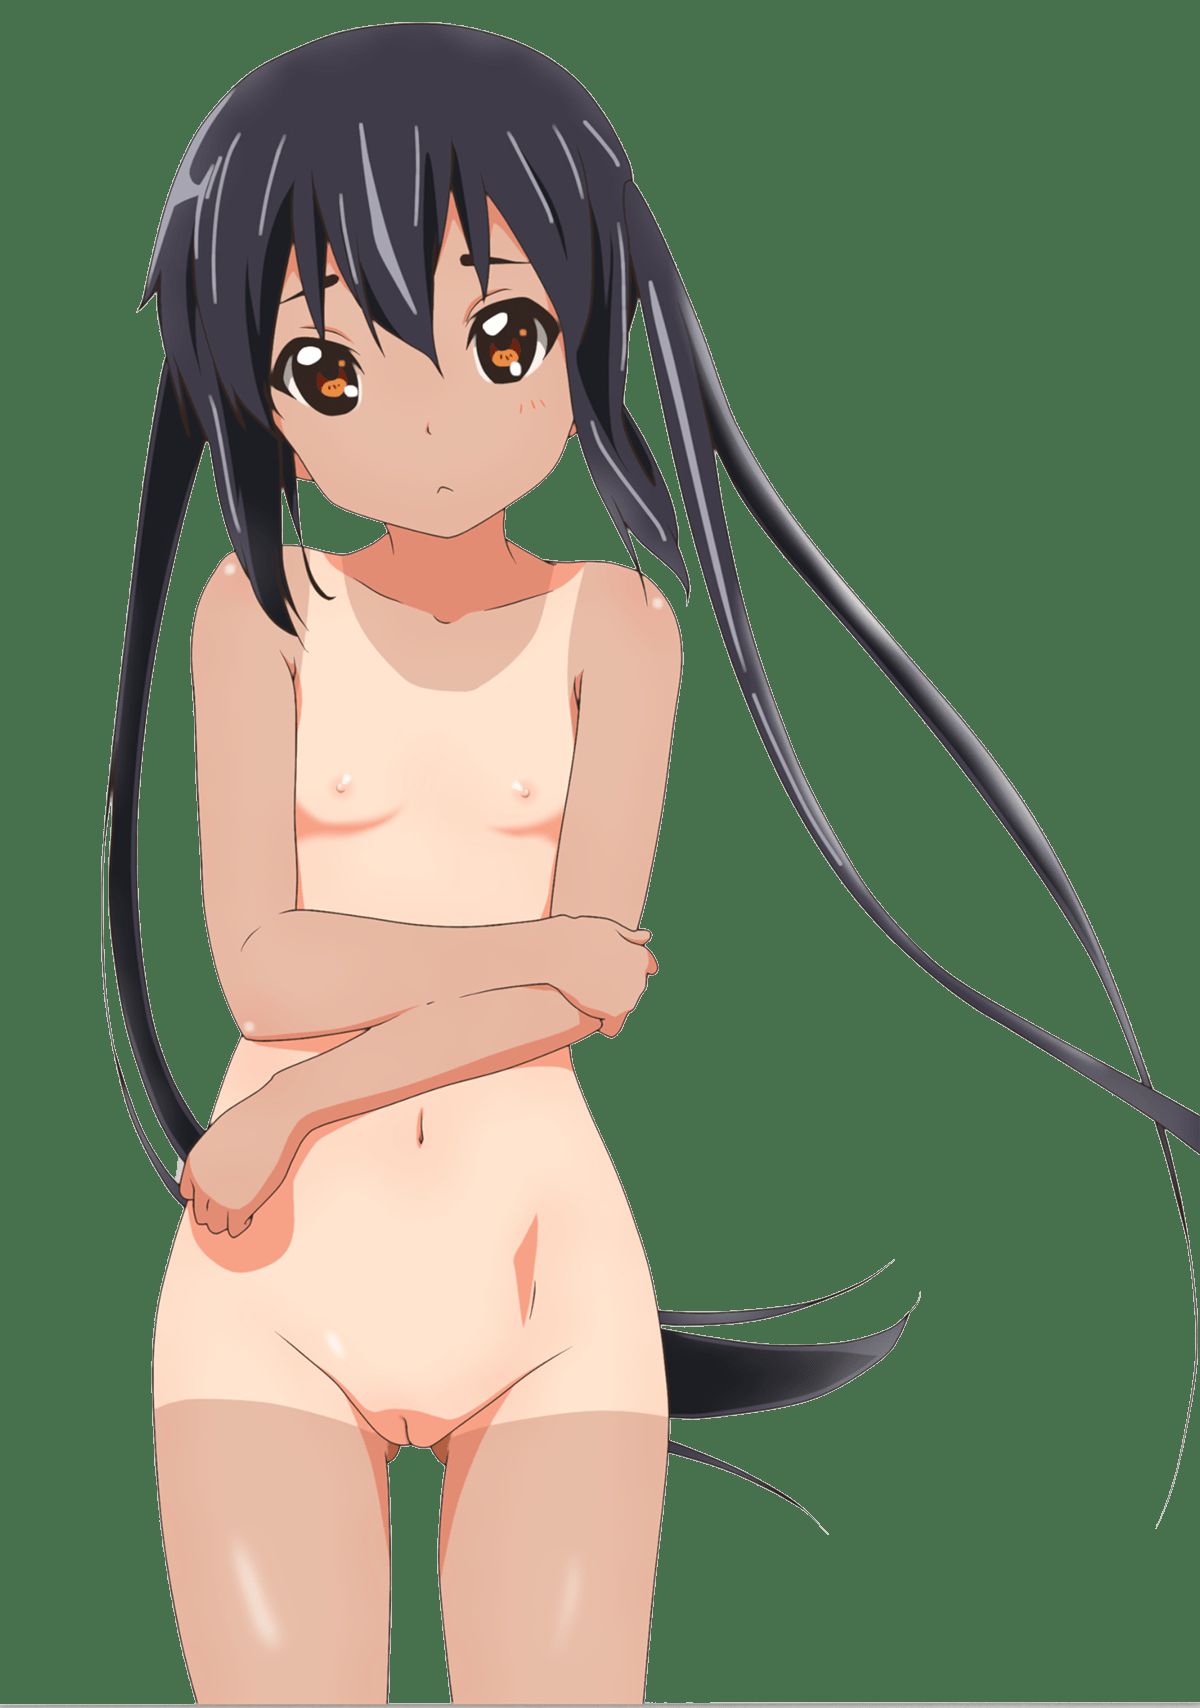 [Anime character material] png background erotic images of anime characters 86 36